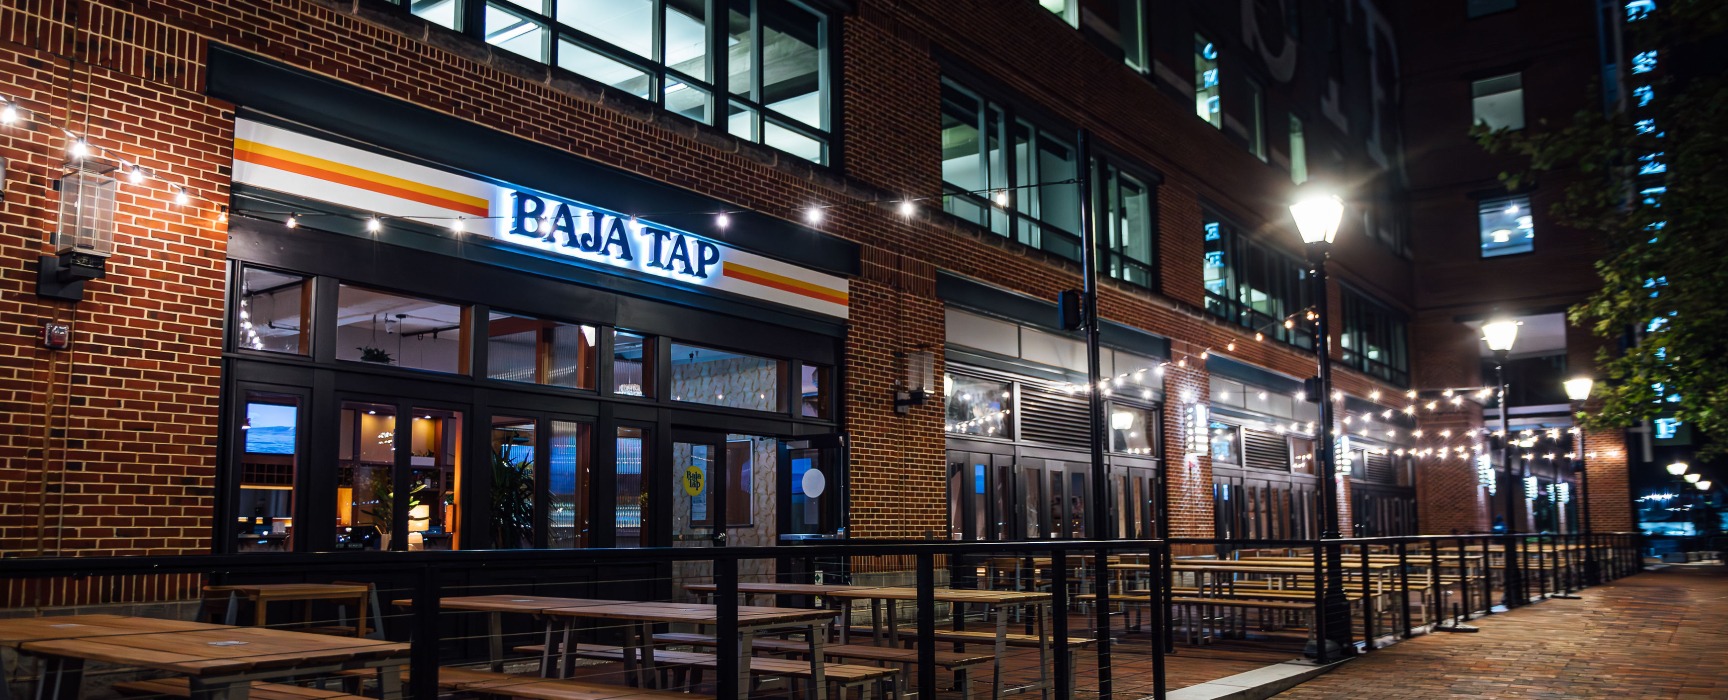 Exterior of Baja Tap restaurant brick storefront at night with illuminated sign and outdoor tables